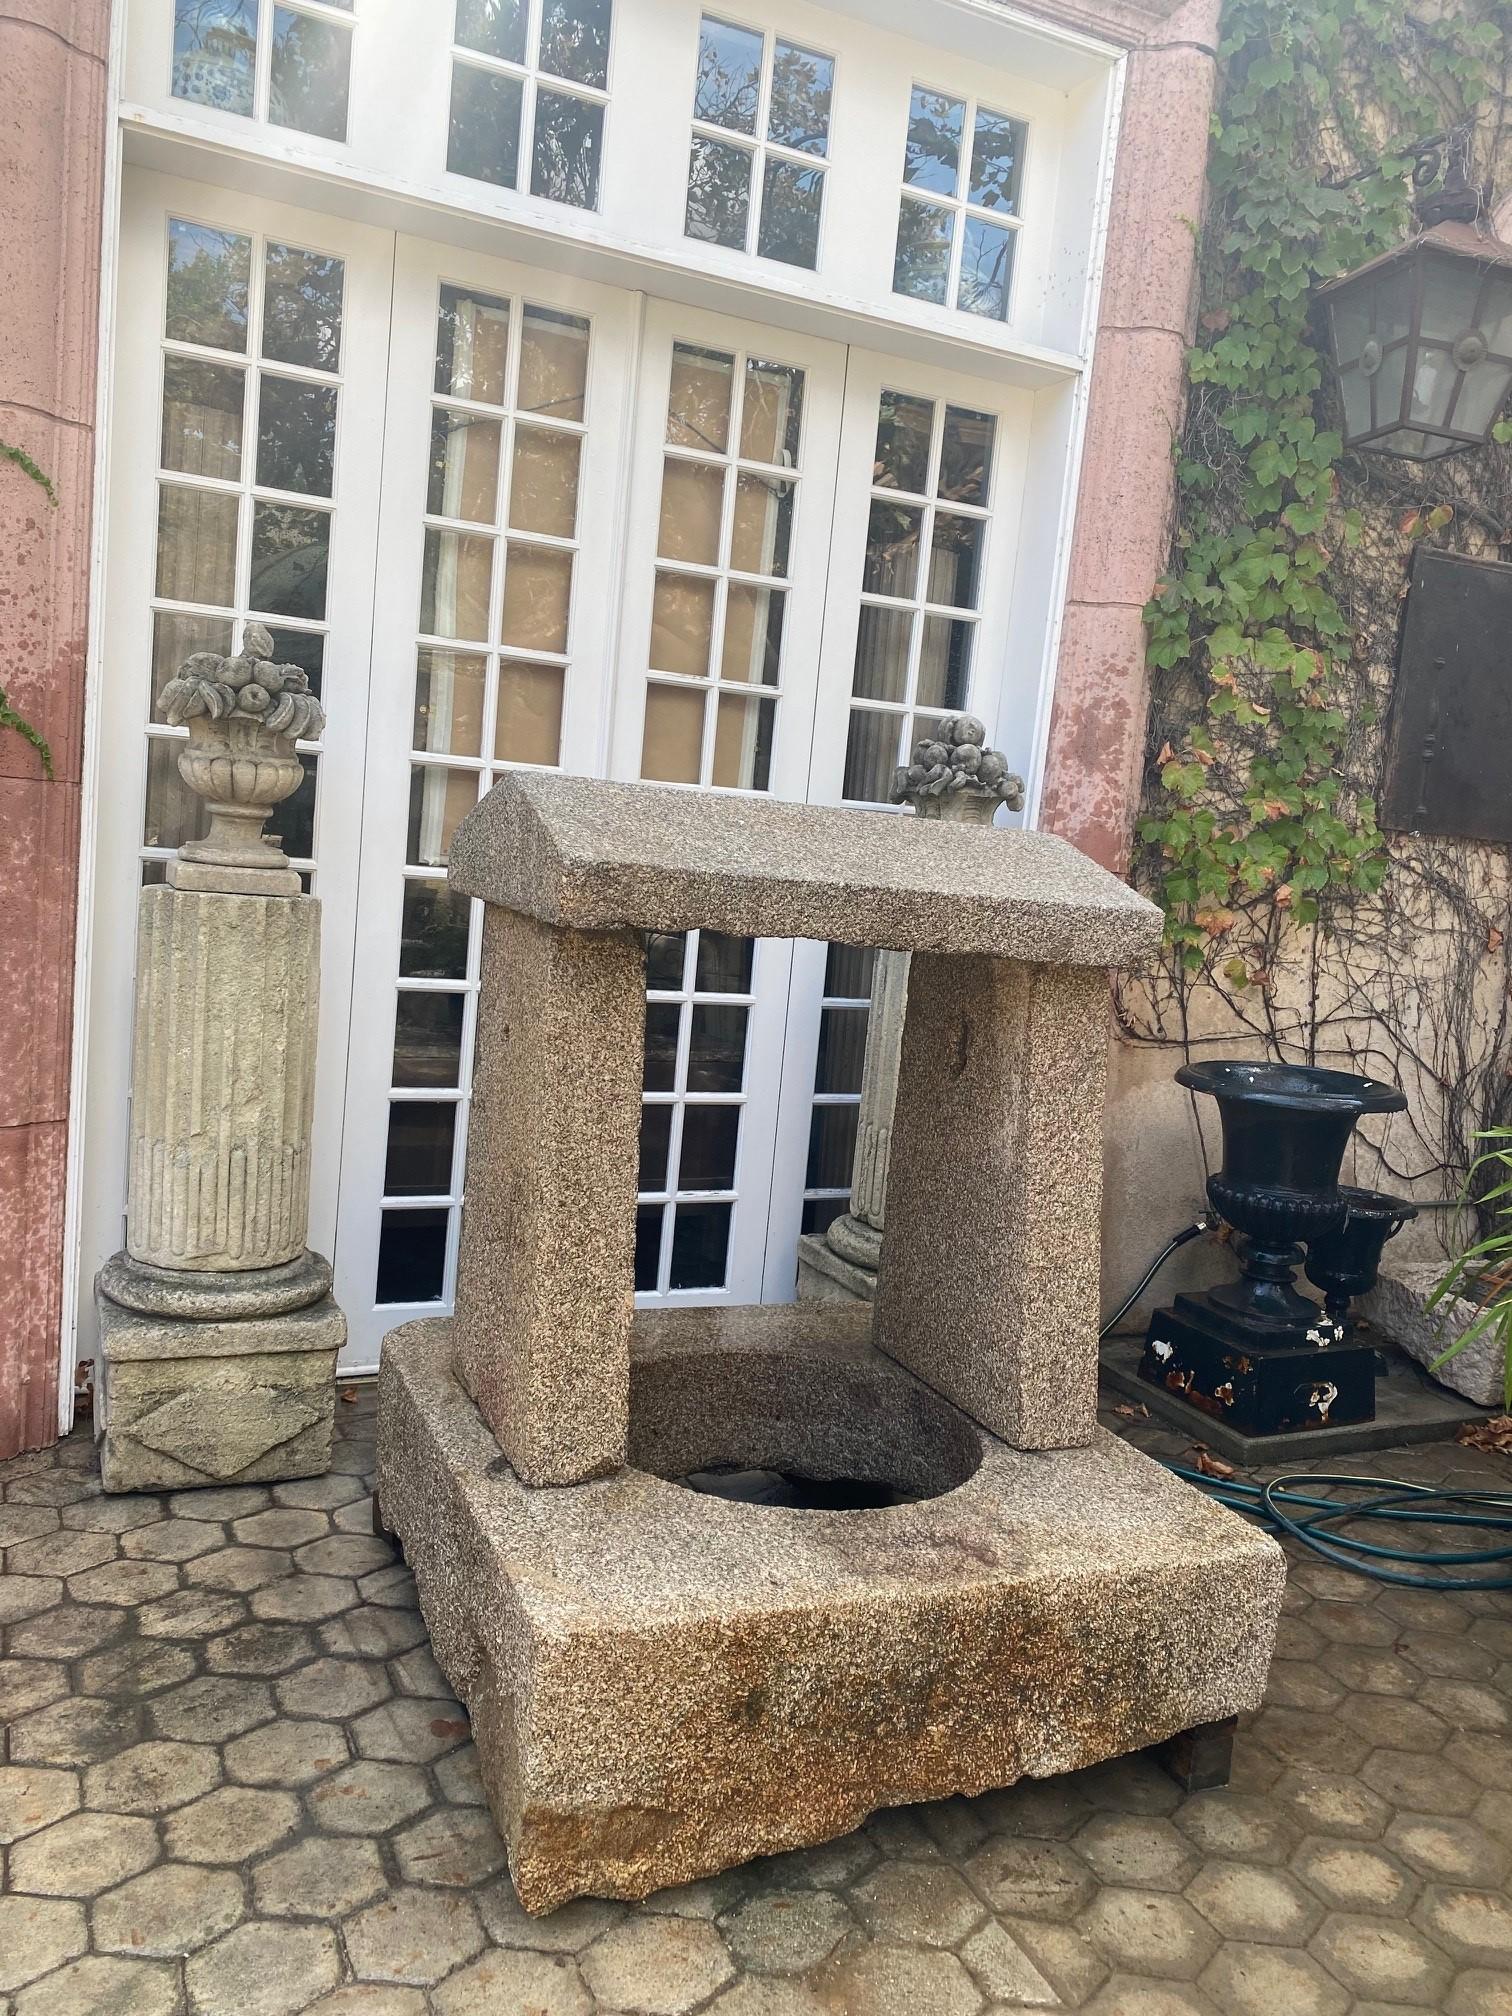 Hand Carved Stone Wellhead center or wall mount Fountain Basin Antique Fire Pit . A nice hand carved granite late 18th century - early 19th century well head square shape with niche stone block slabs . Simple architectural forms square round